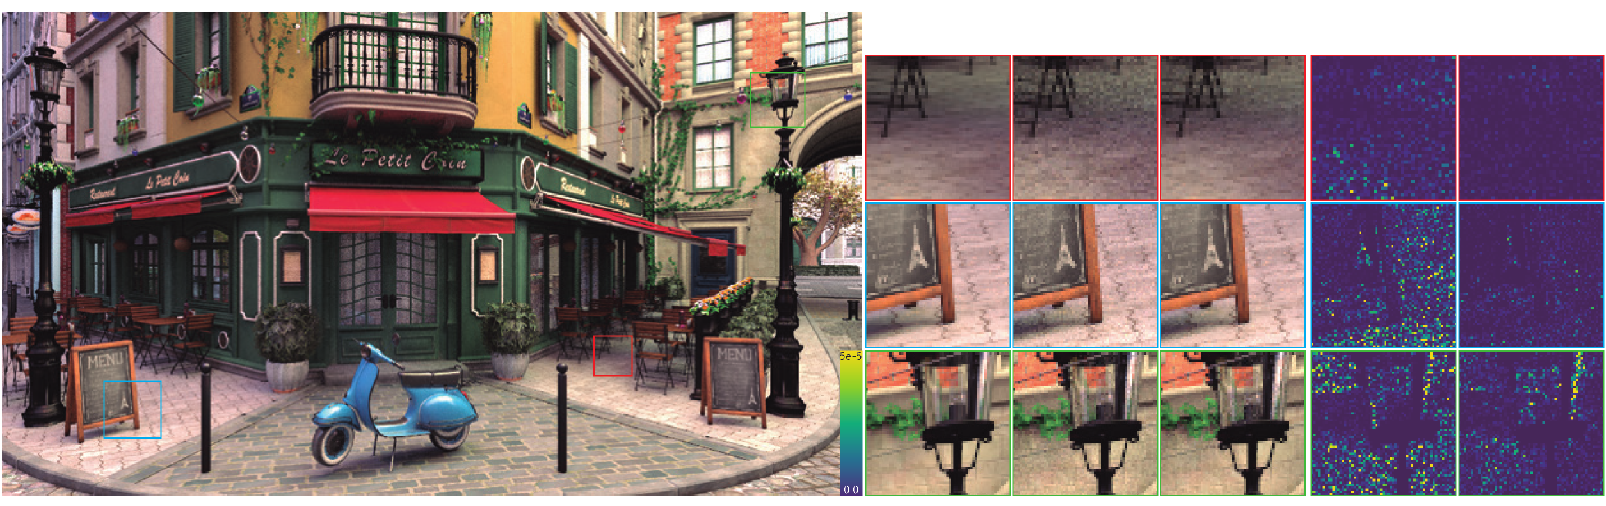 Bistro: Unbiased rendering of a complex scene with global illumination (22 indirect bounces, resulting in a 48-dimensional integration domain). Traditional Monte Carlo-based rendering results in high variance even with importance sampling techniques. In contrast, our technique combines multiple importance sampling with an adaptive piecewise-polynomial control variate (4D in this example): Our control variate closely approximates the low-frequency regions of the signal, while leaving the high-frequency details on the residual, which is estimated using Monte Carlo integration. This results in lower variance with faster convergence. Except for the reference, the images were generated using 512 samples per pixel.